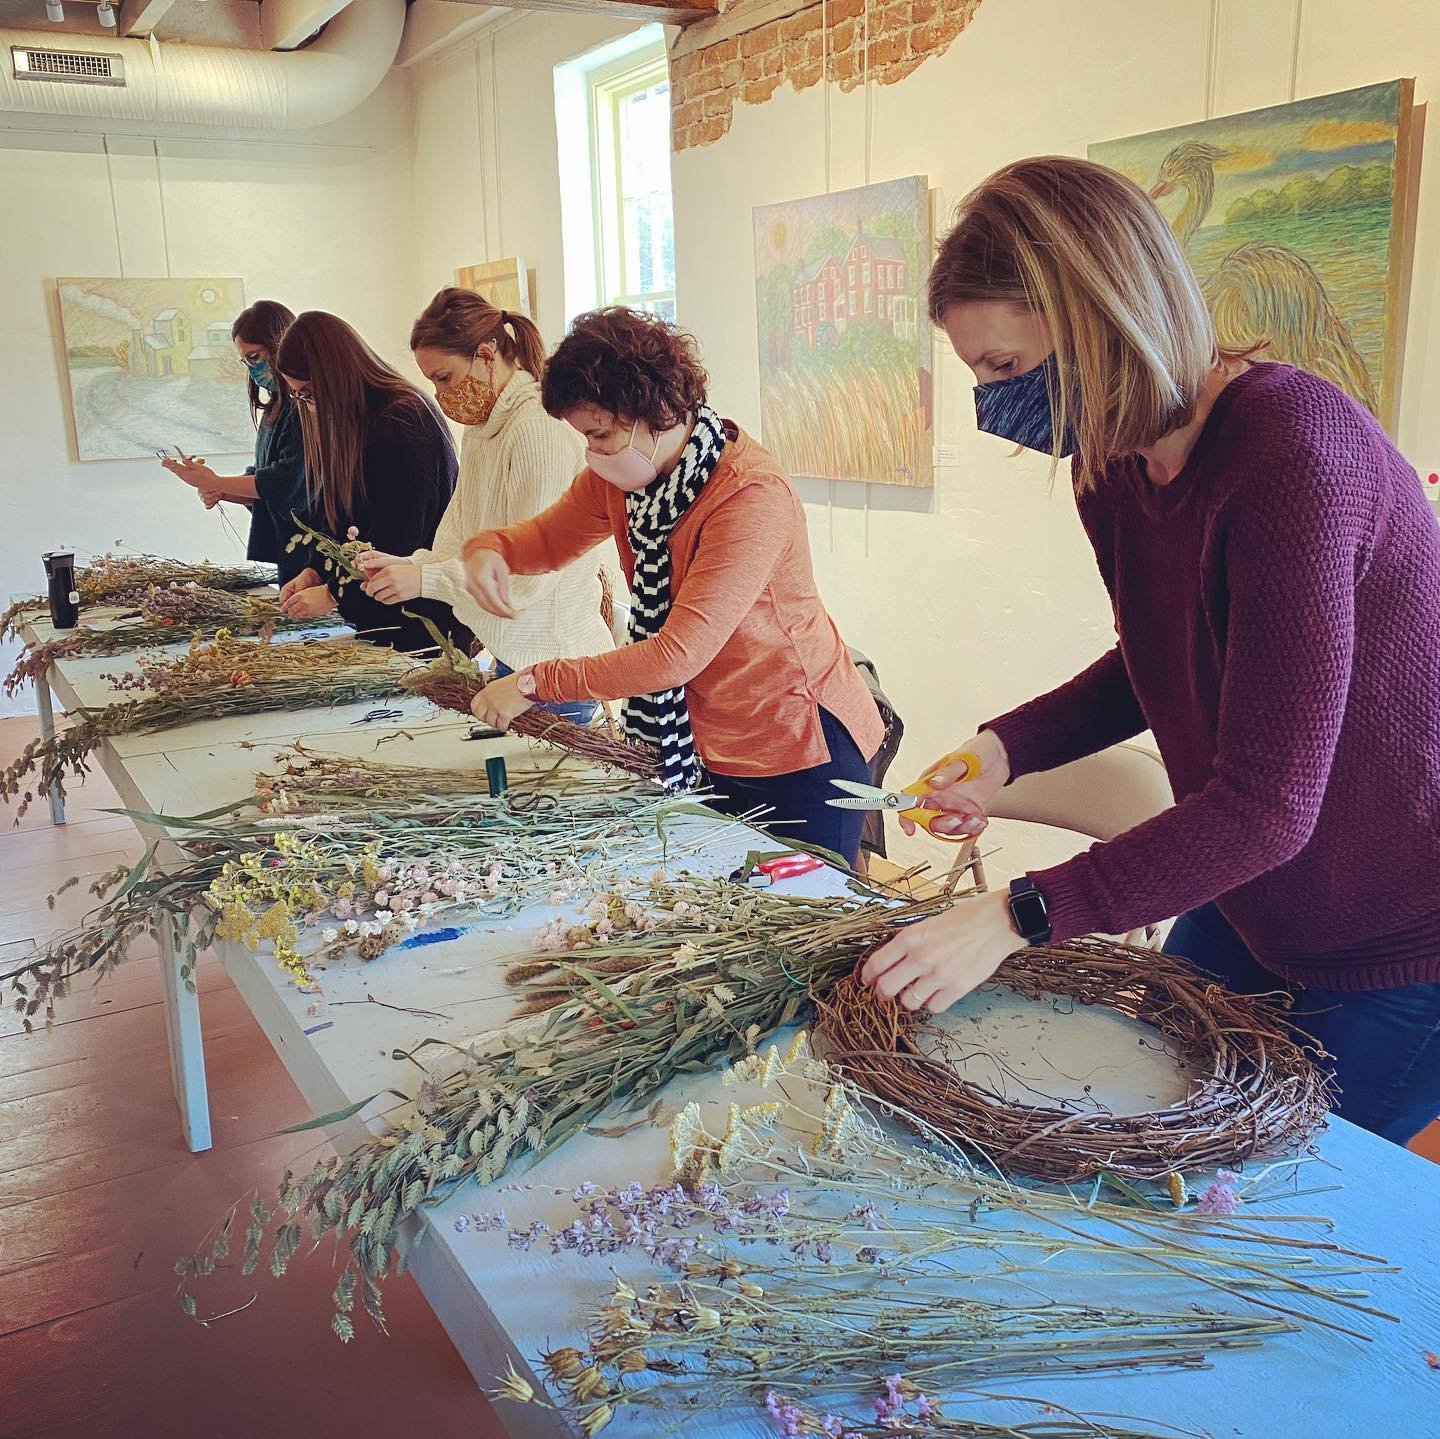 Dried Floral Wreath Making